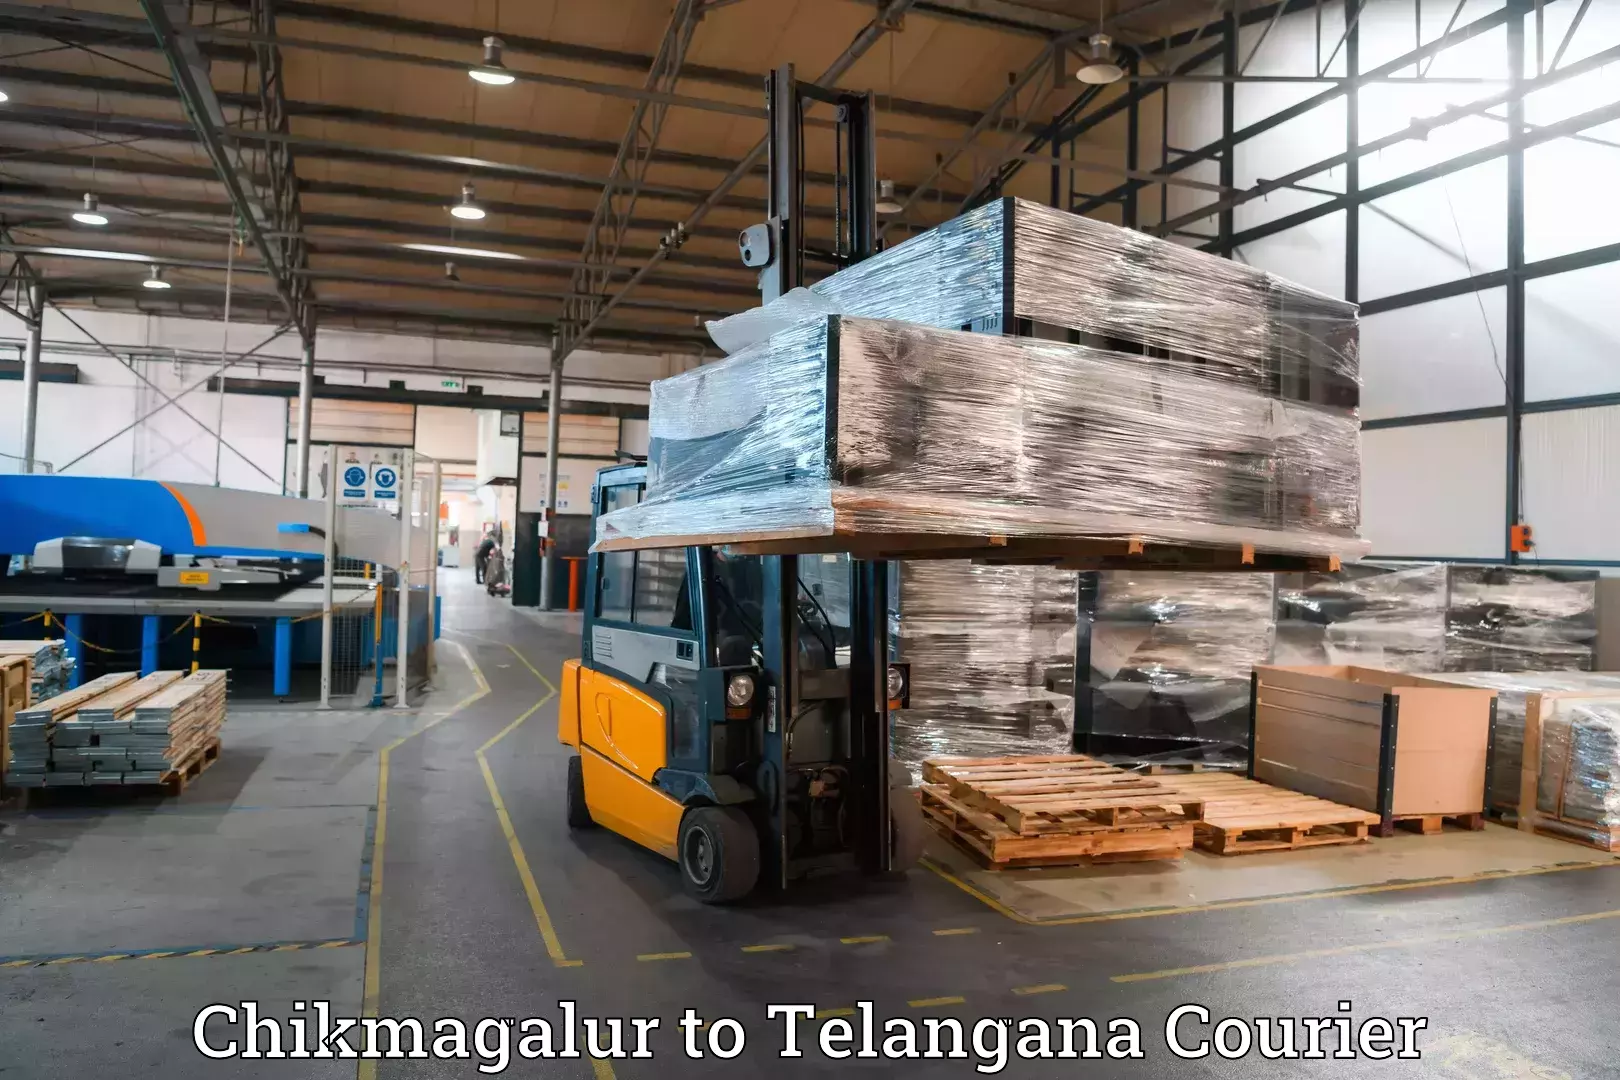 Luggage transport company Chikmagalur to Dornakal